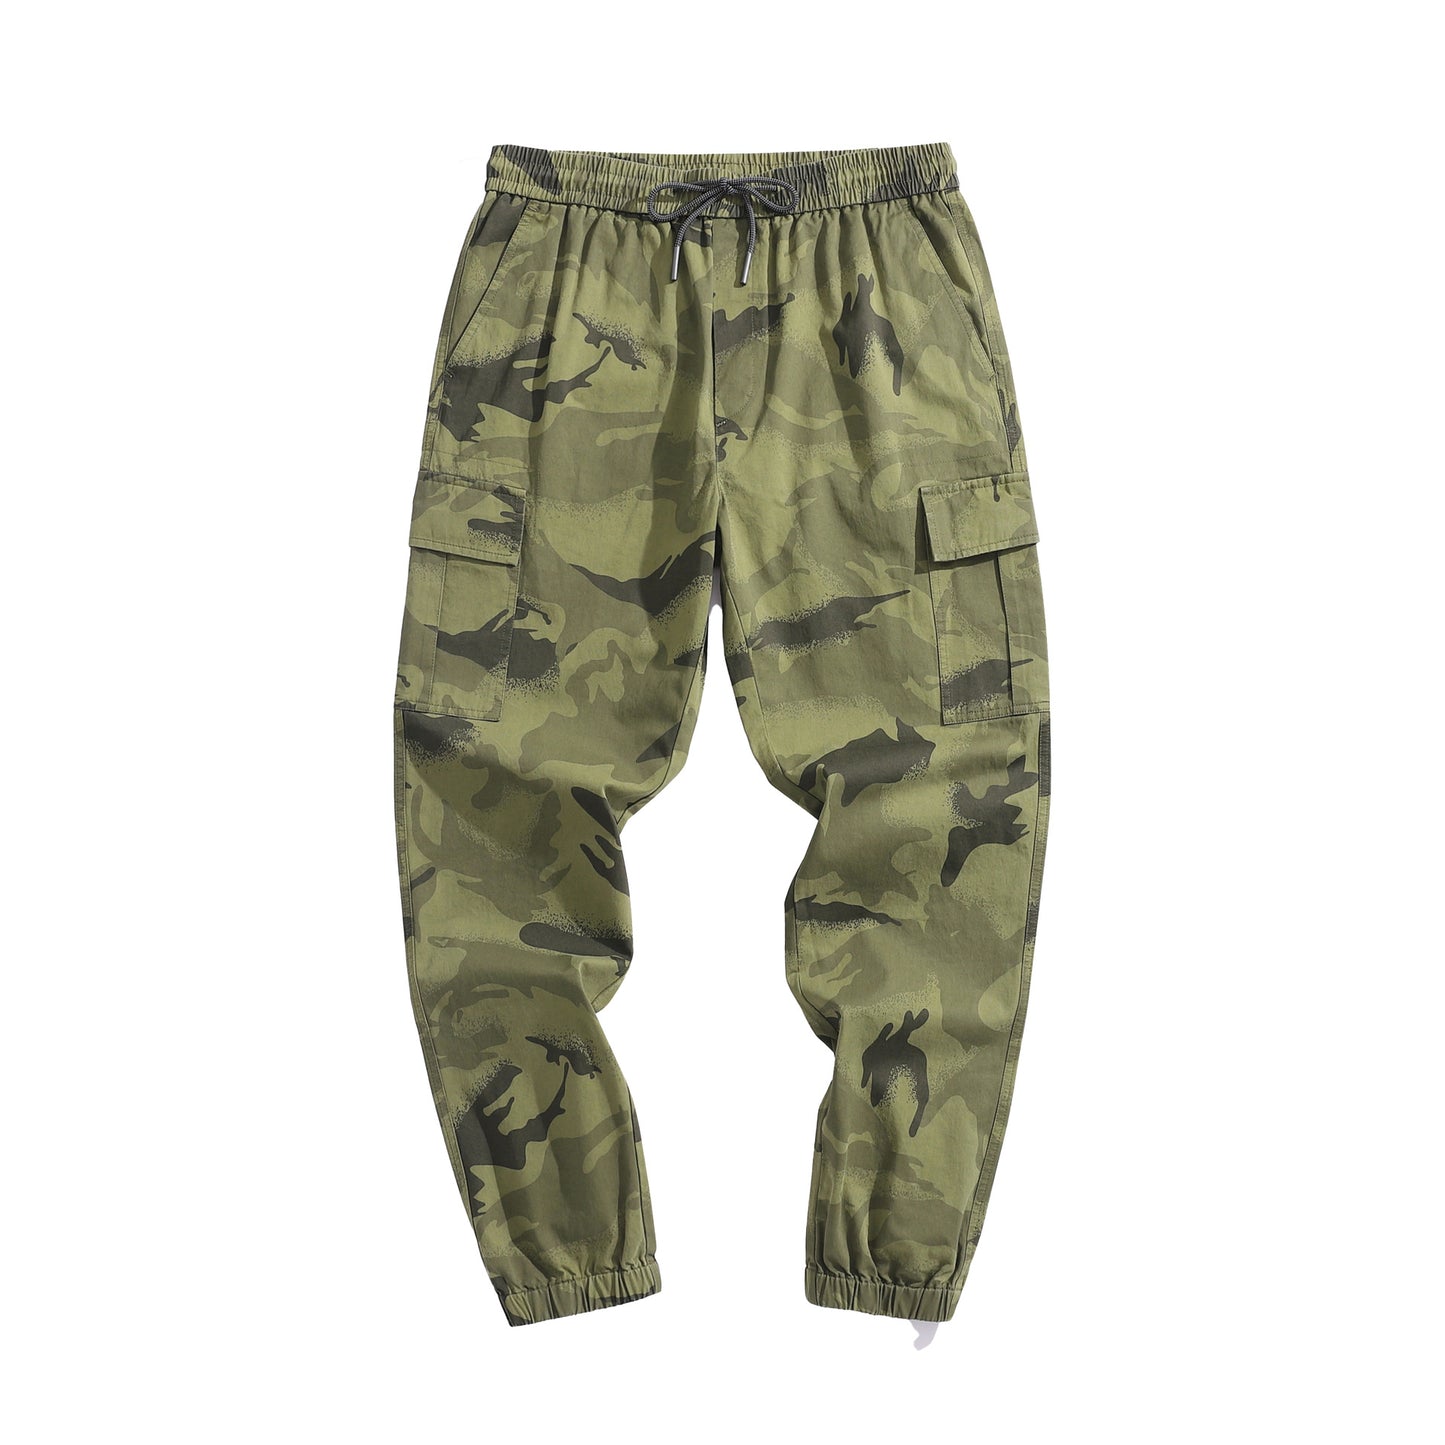 Camouflage multi bag overalls: Men's new fashion, all-around, strong belt, foot binding, leisure pants FashionExpress